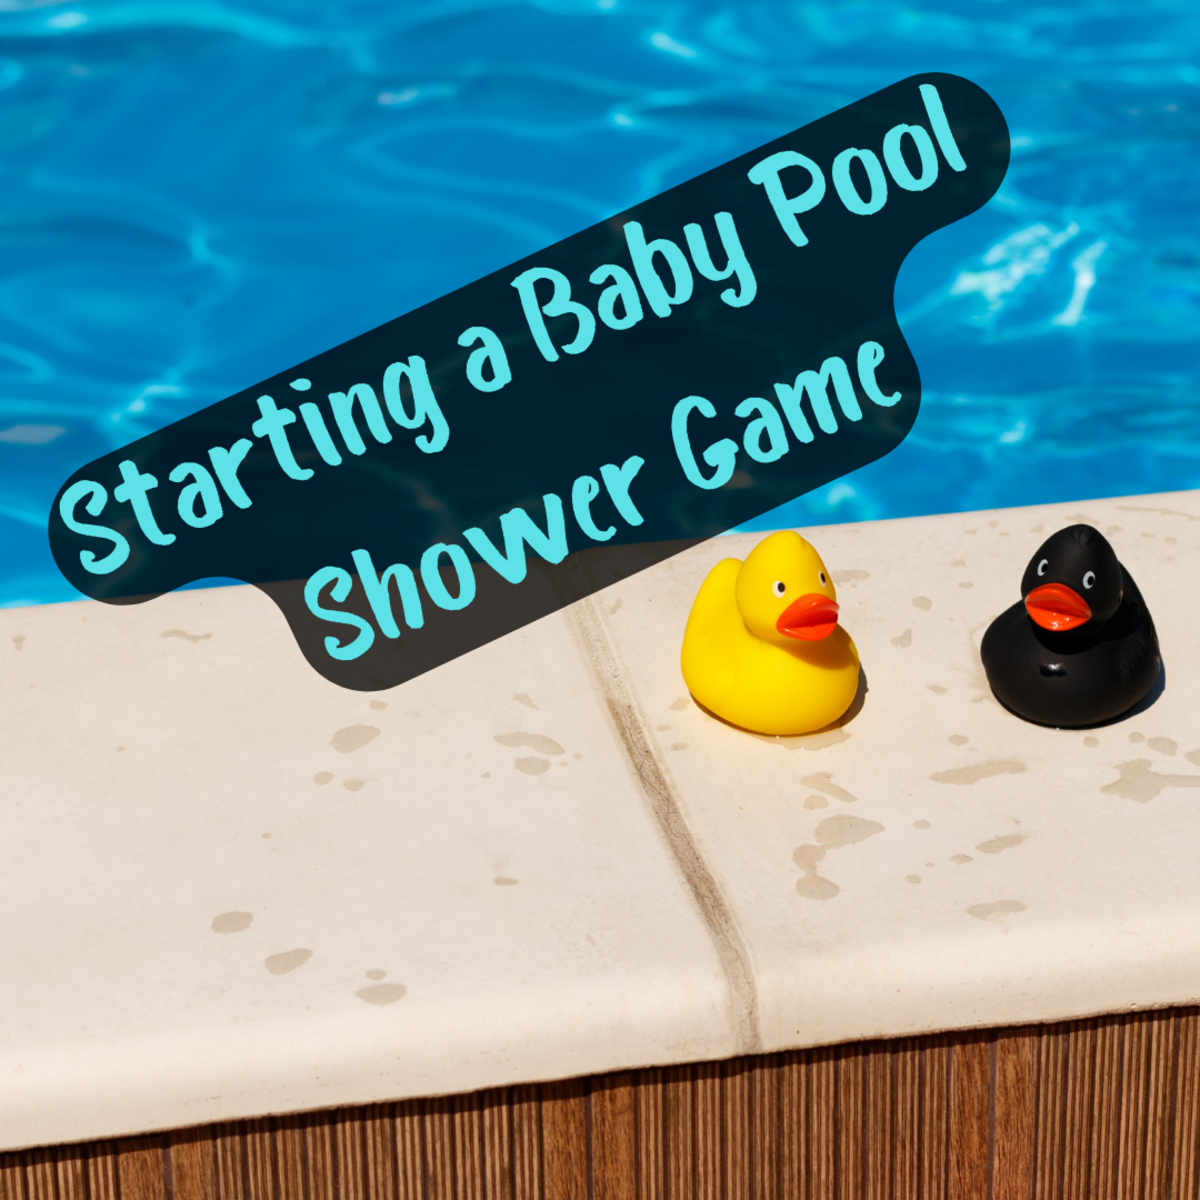 Read on to learn how to host a baby pool at your baby shower!